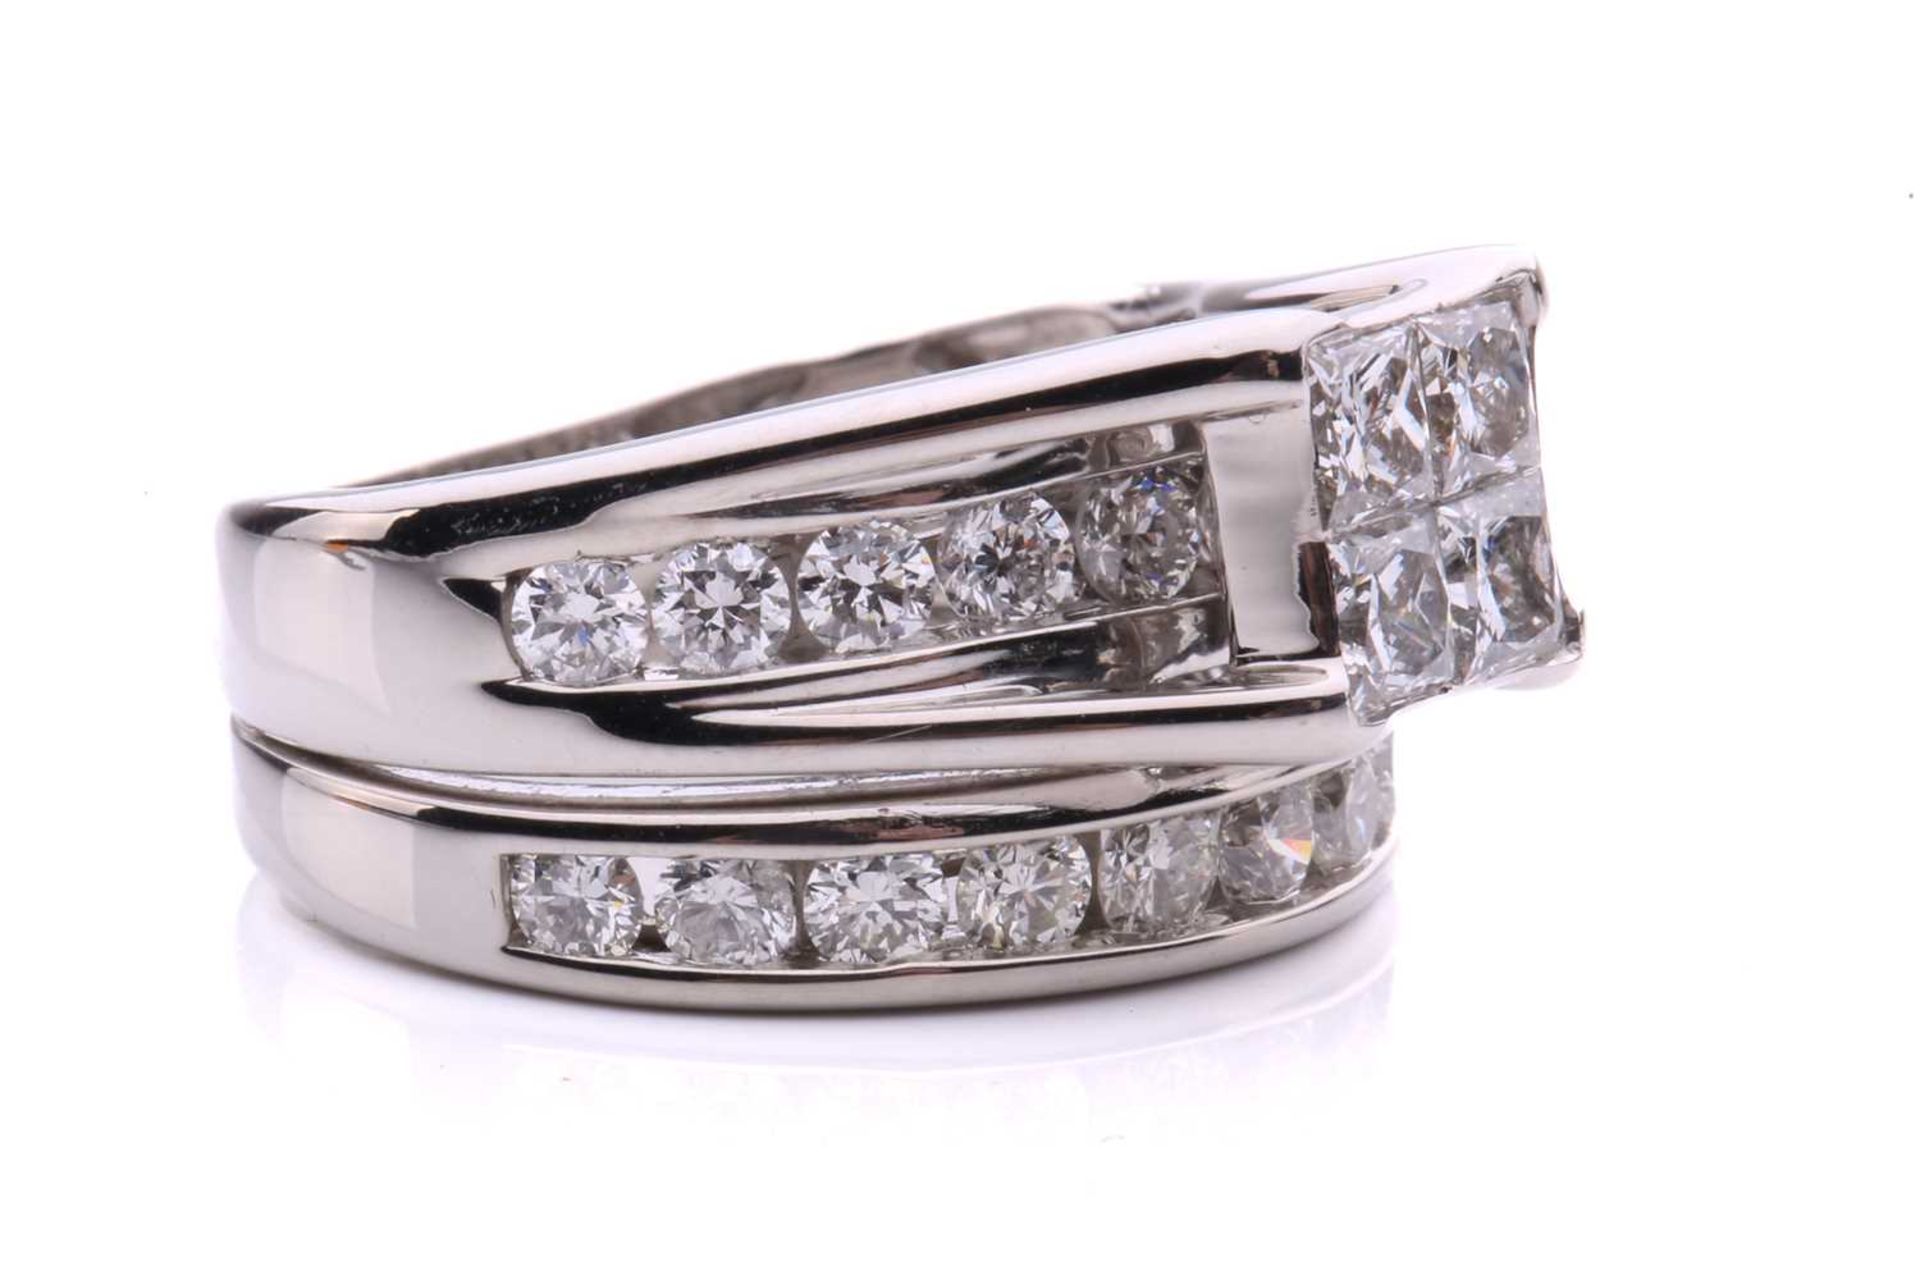 A diamond set bridal set rings, with 4 illusion set princess cut diamonds with an under hoop channel - Image 6 of 8